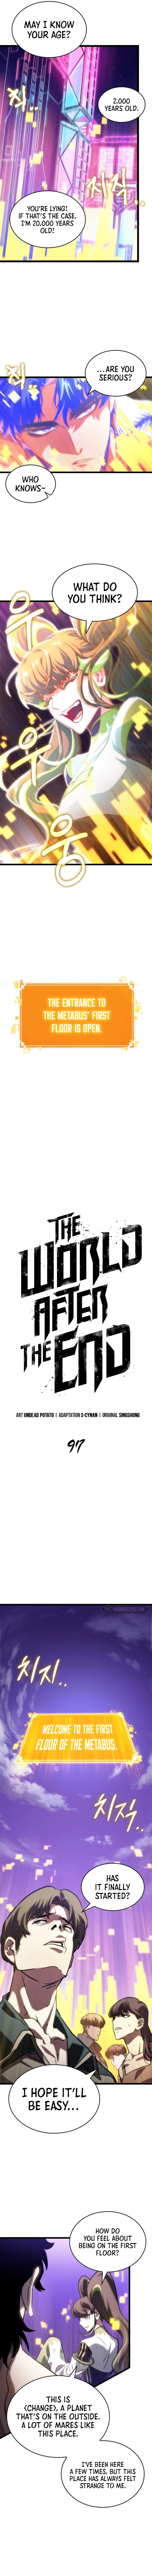 The World After The Fall 97 3